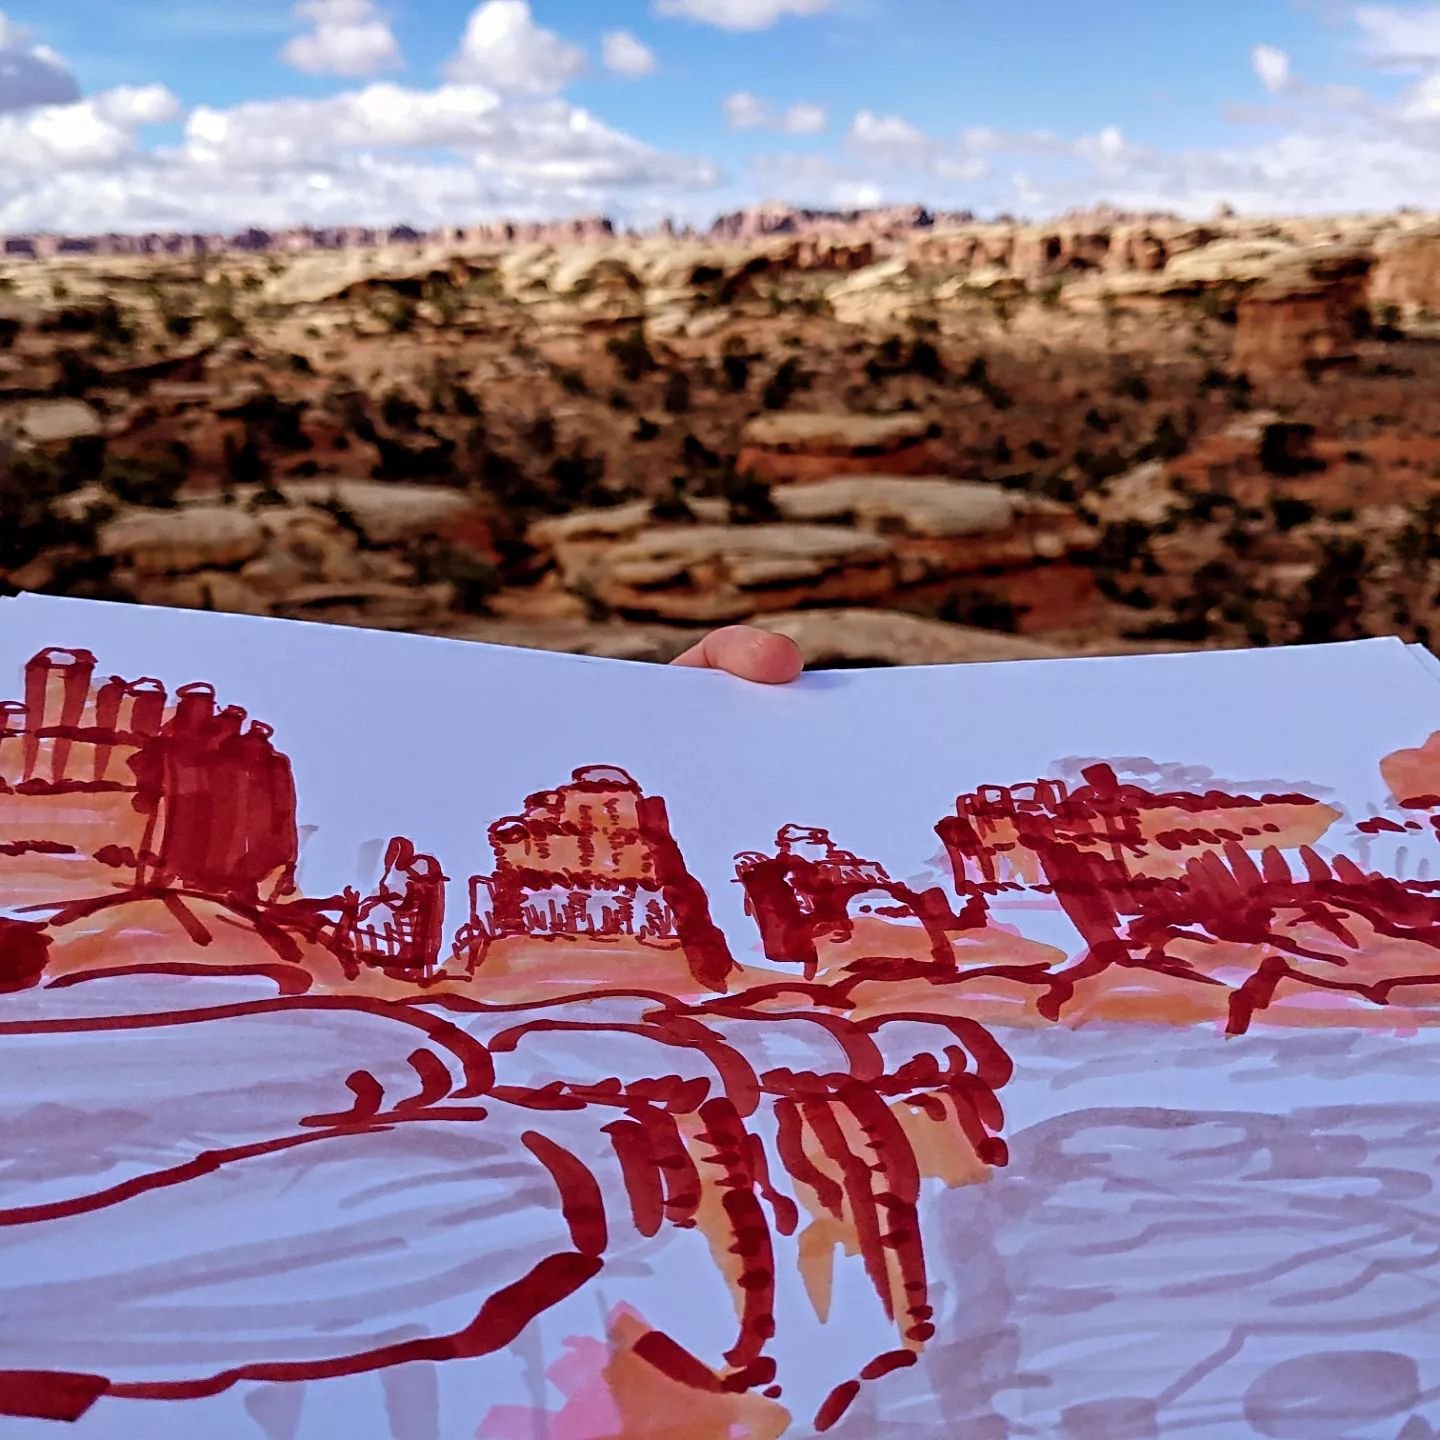 Dropped down south to the Needles District of Canyonlands National Park! I was loving this view of the Needles, and got a few sketches in before I started hunting for the blooms in the area. 

I got caught up in catching the light on this perfect Ind